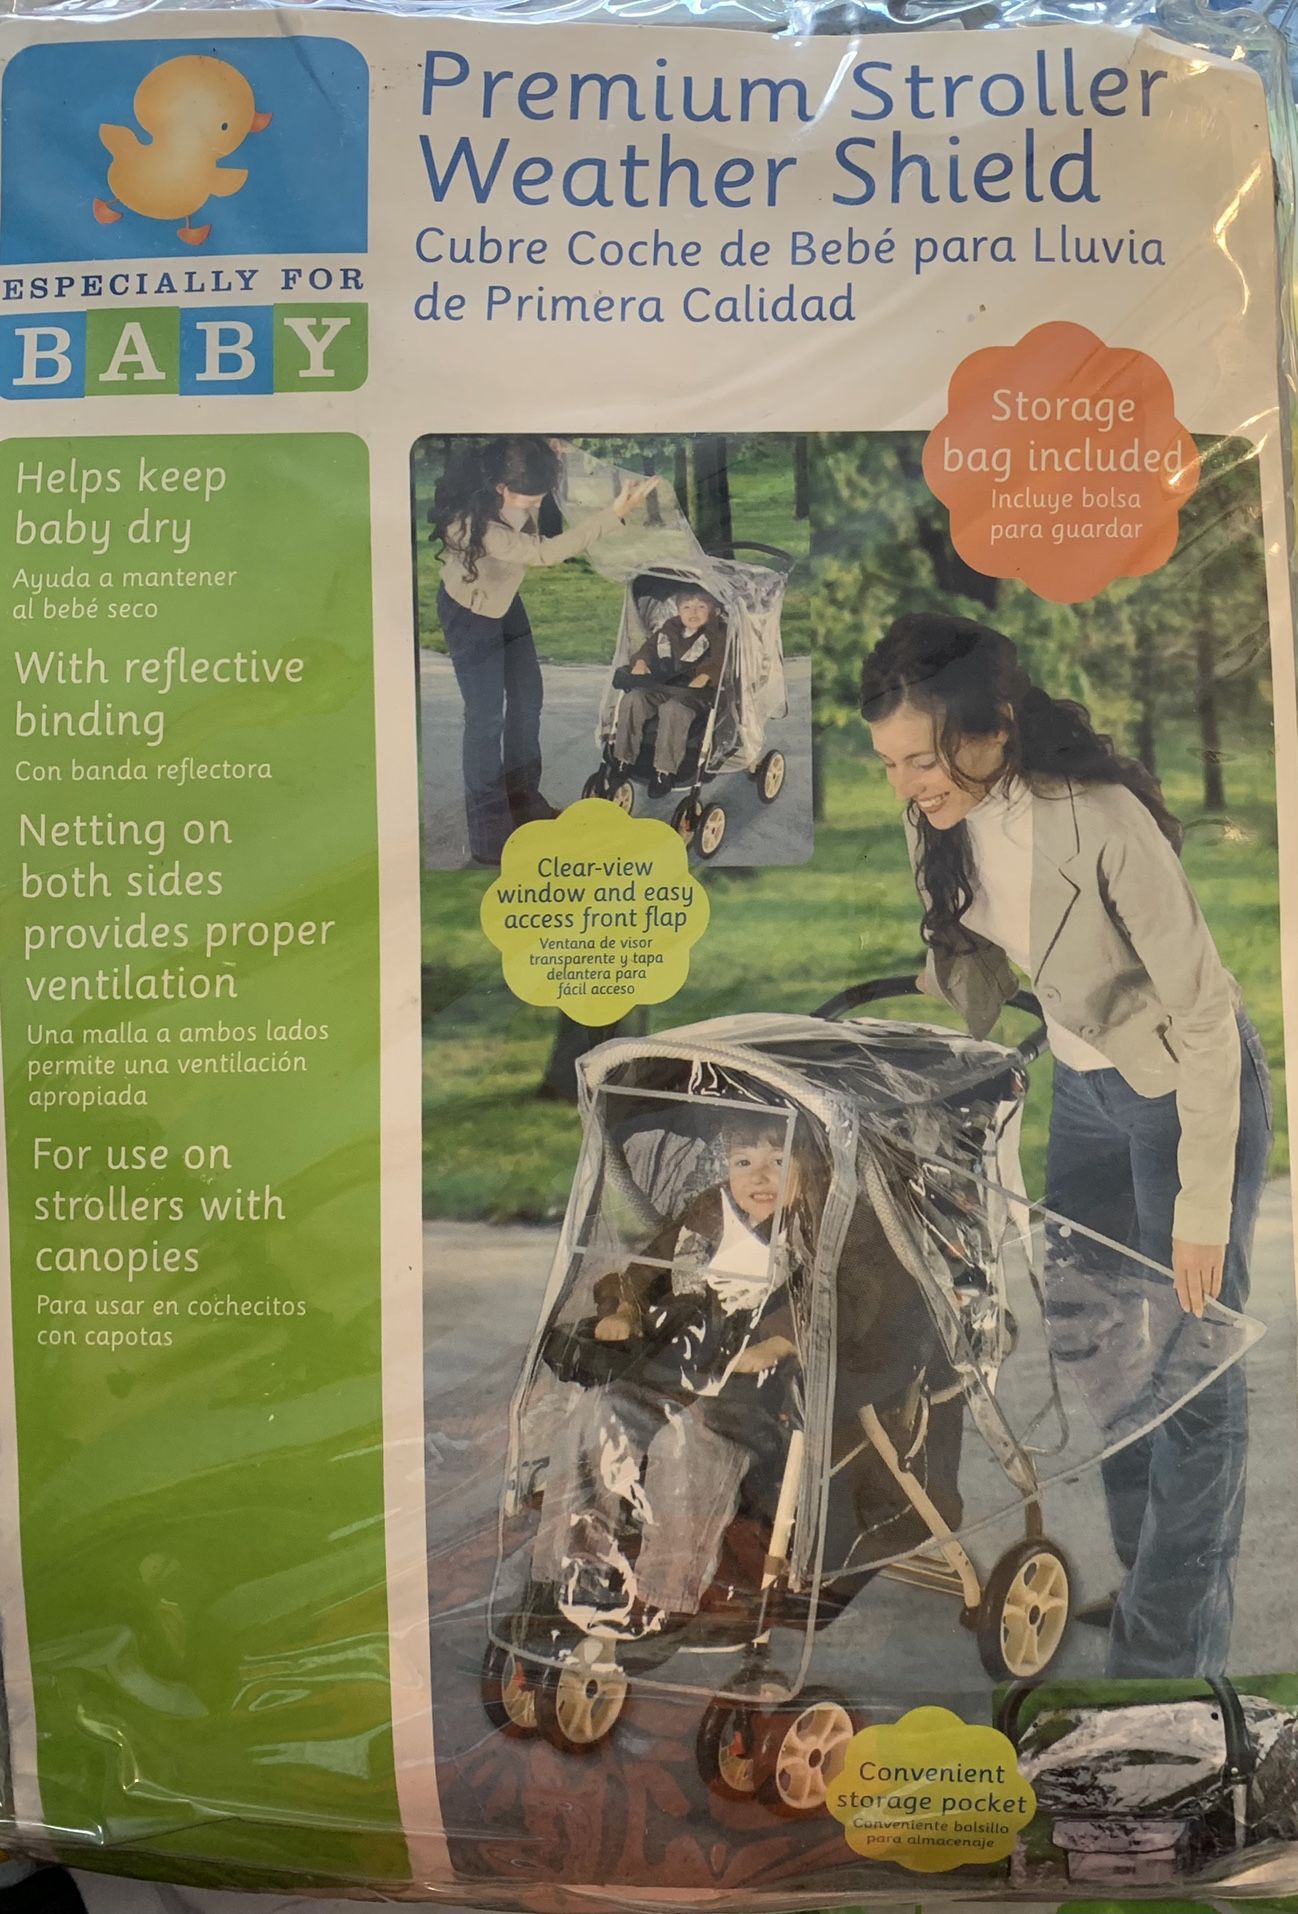 Especially for Baby Premium Stroller Weather Shield